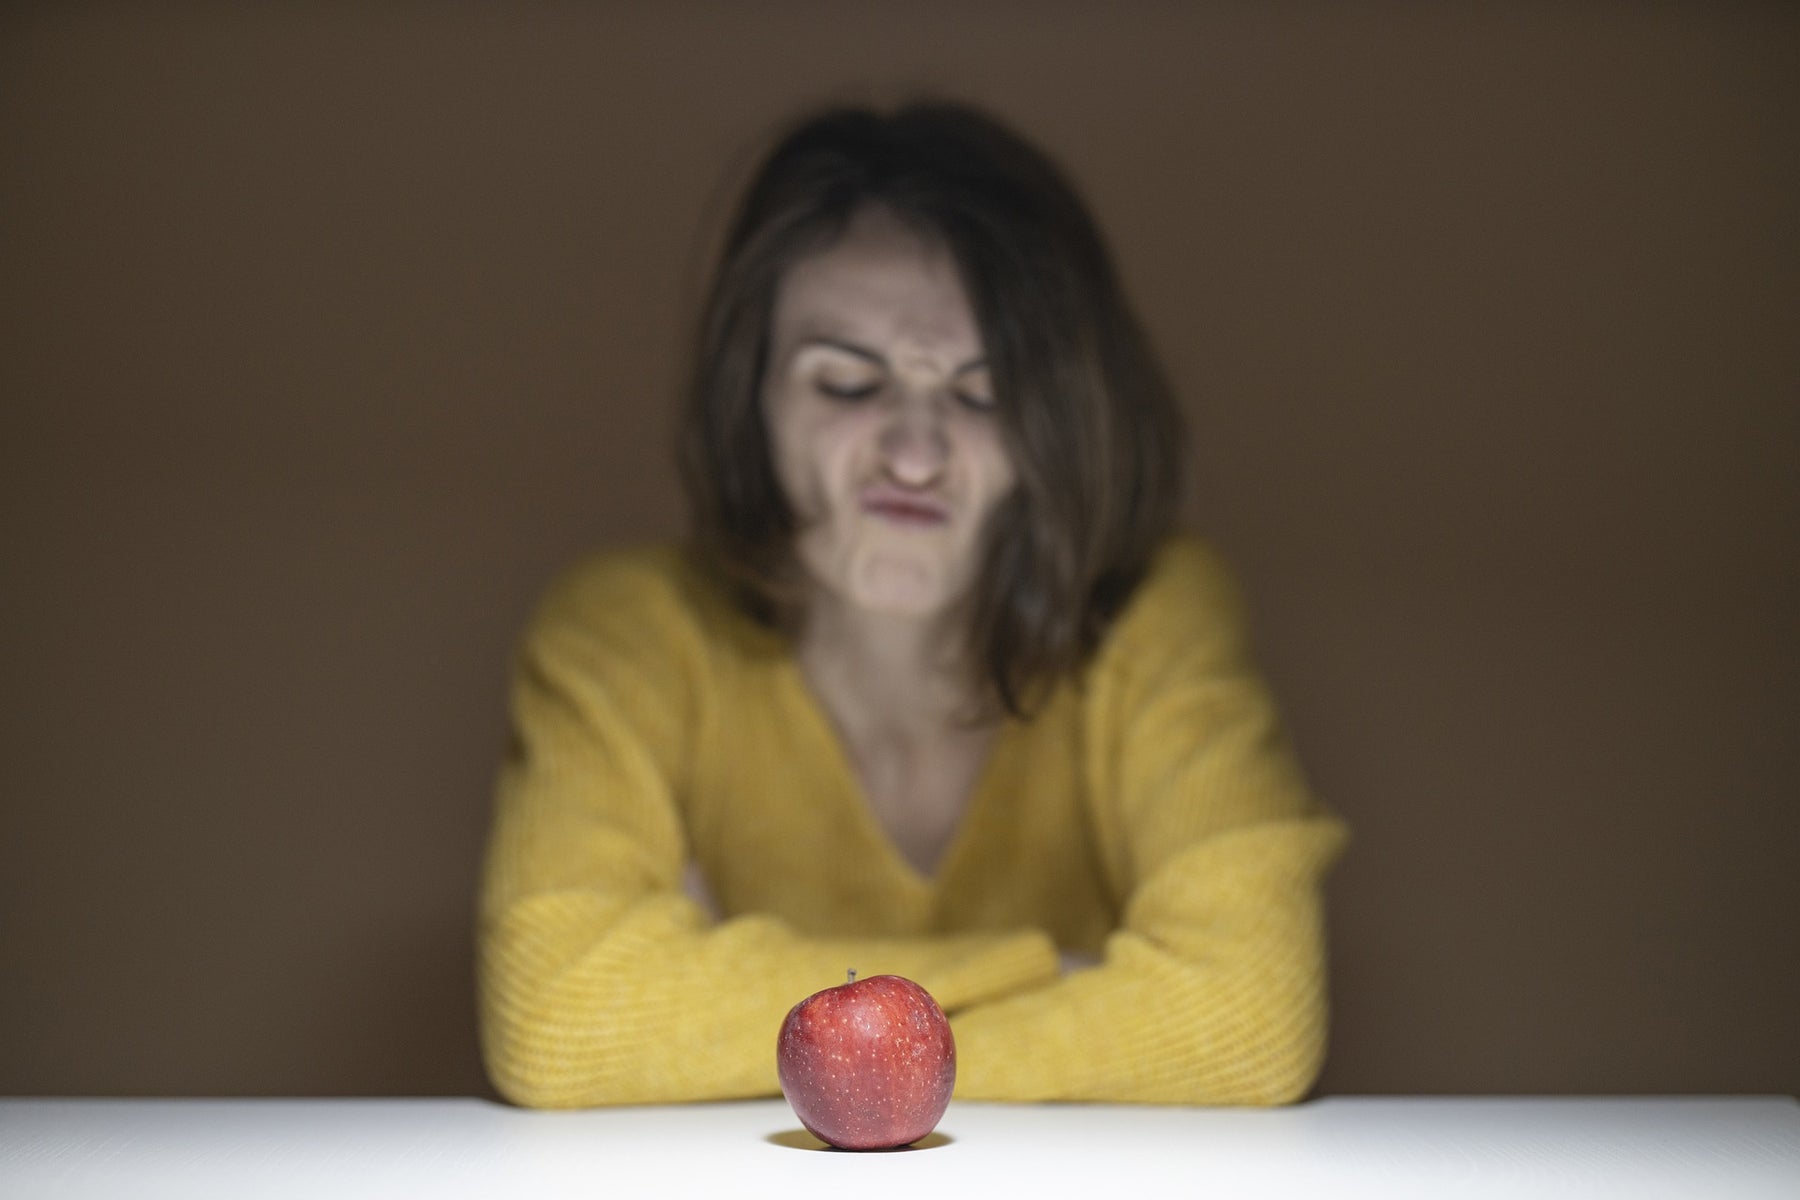 Angry woman looking down a red apple on a table